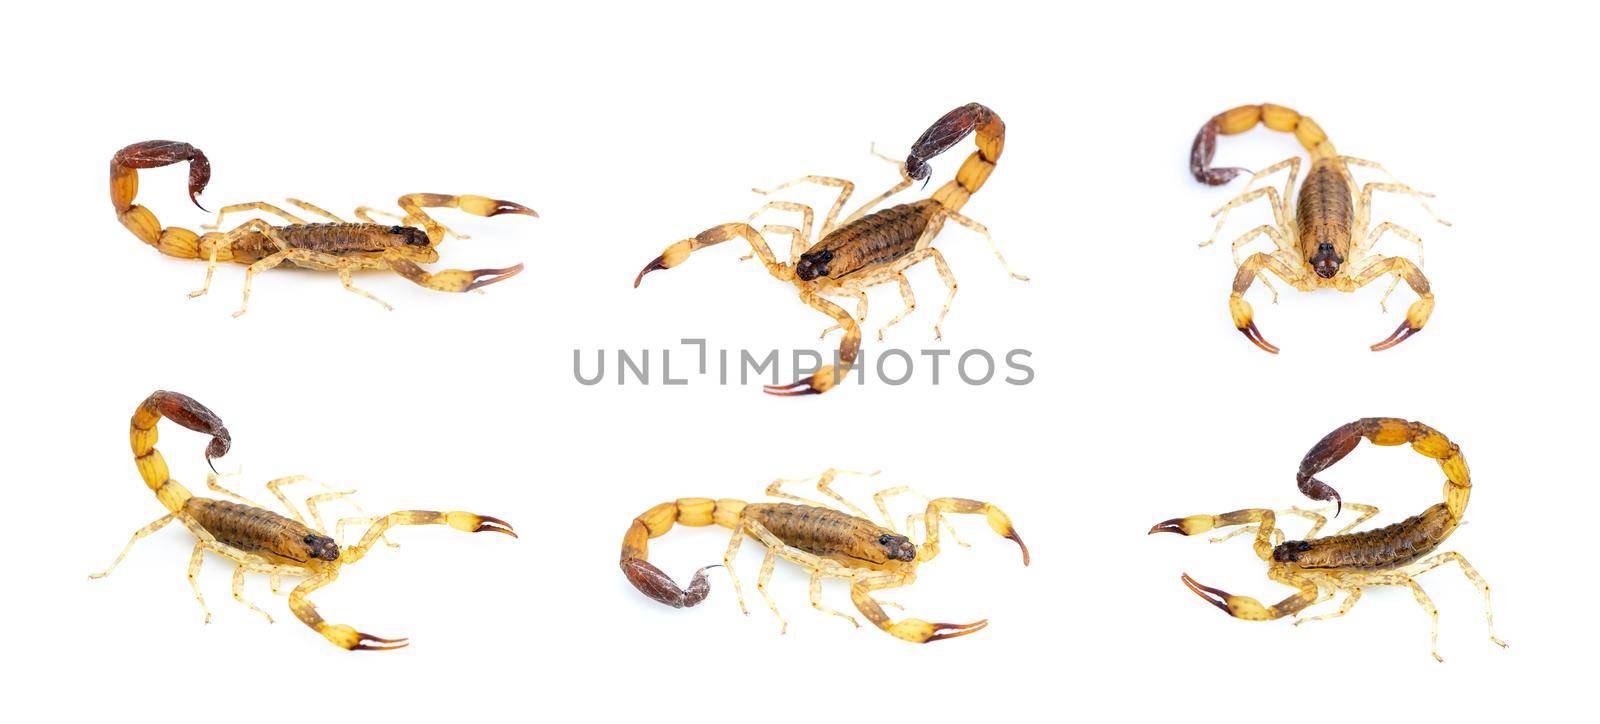 Group of brown scorpion isolated on white background. Insect. Animal.